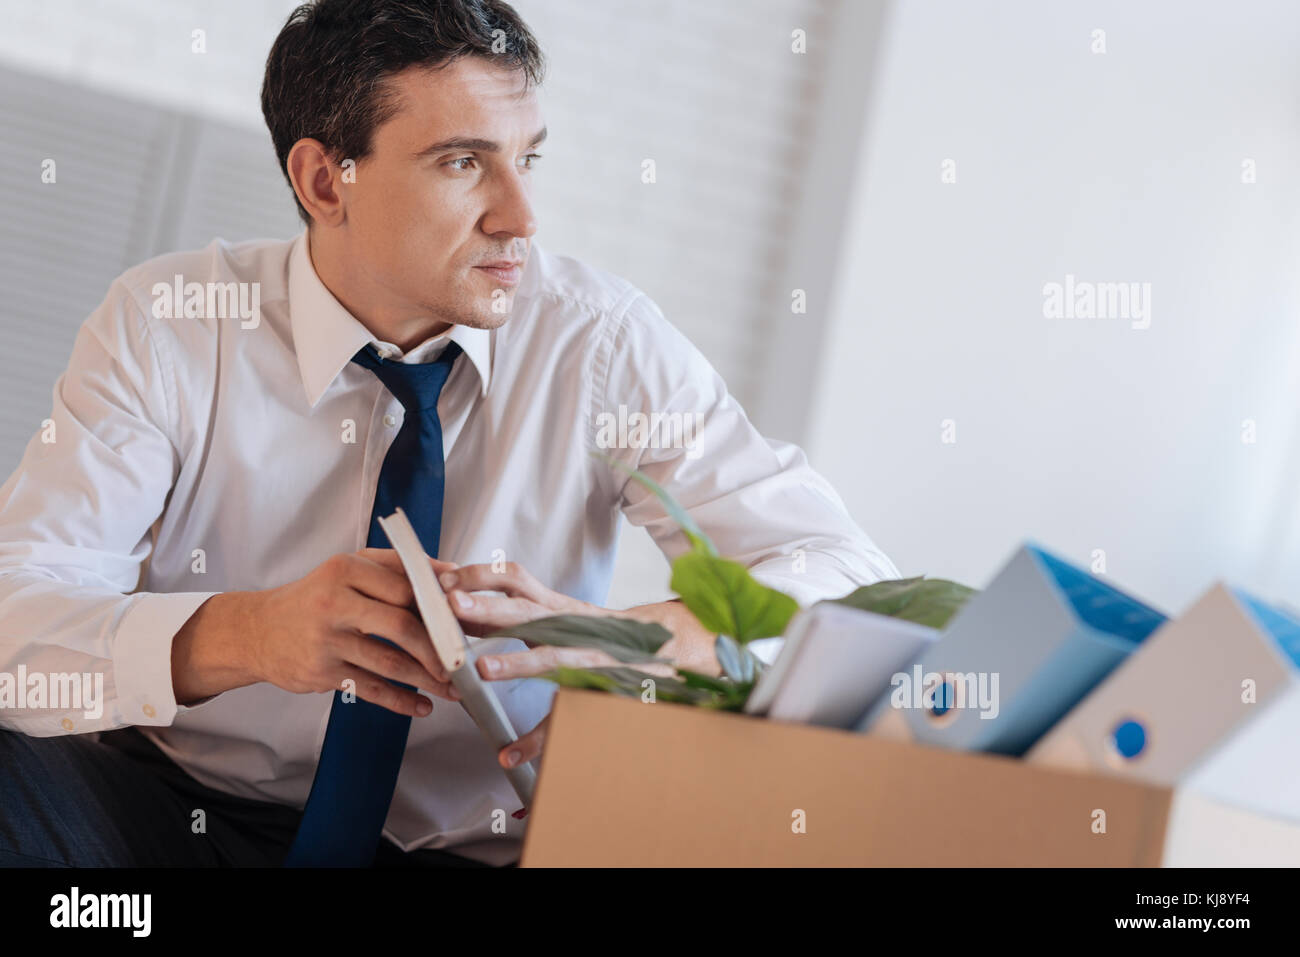 Thoughtful calm man considering his future after being dismissed Stock Photo